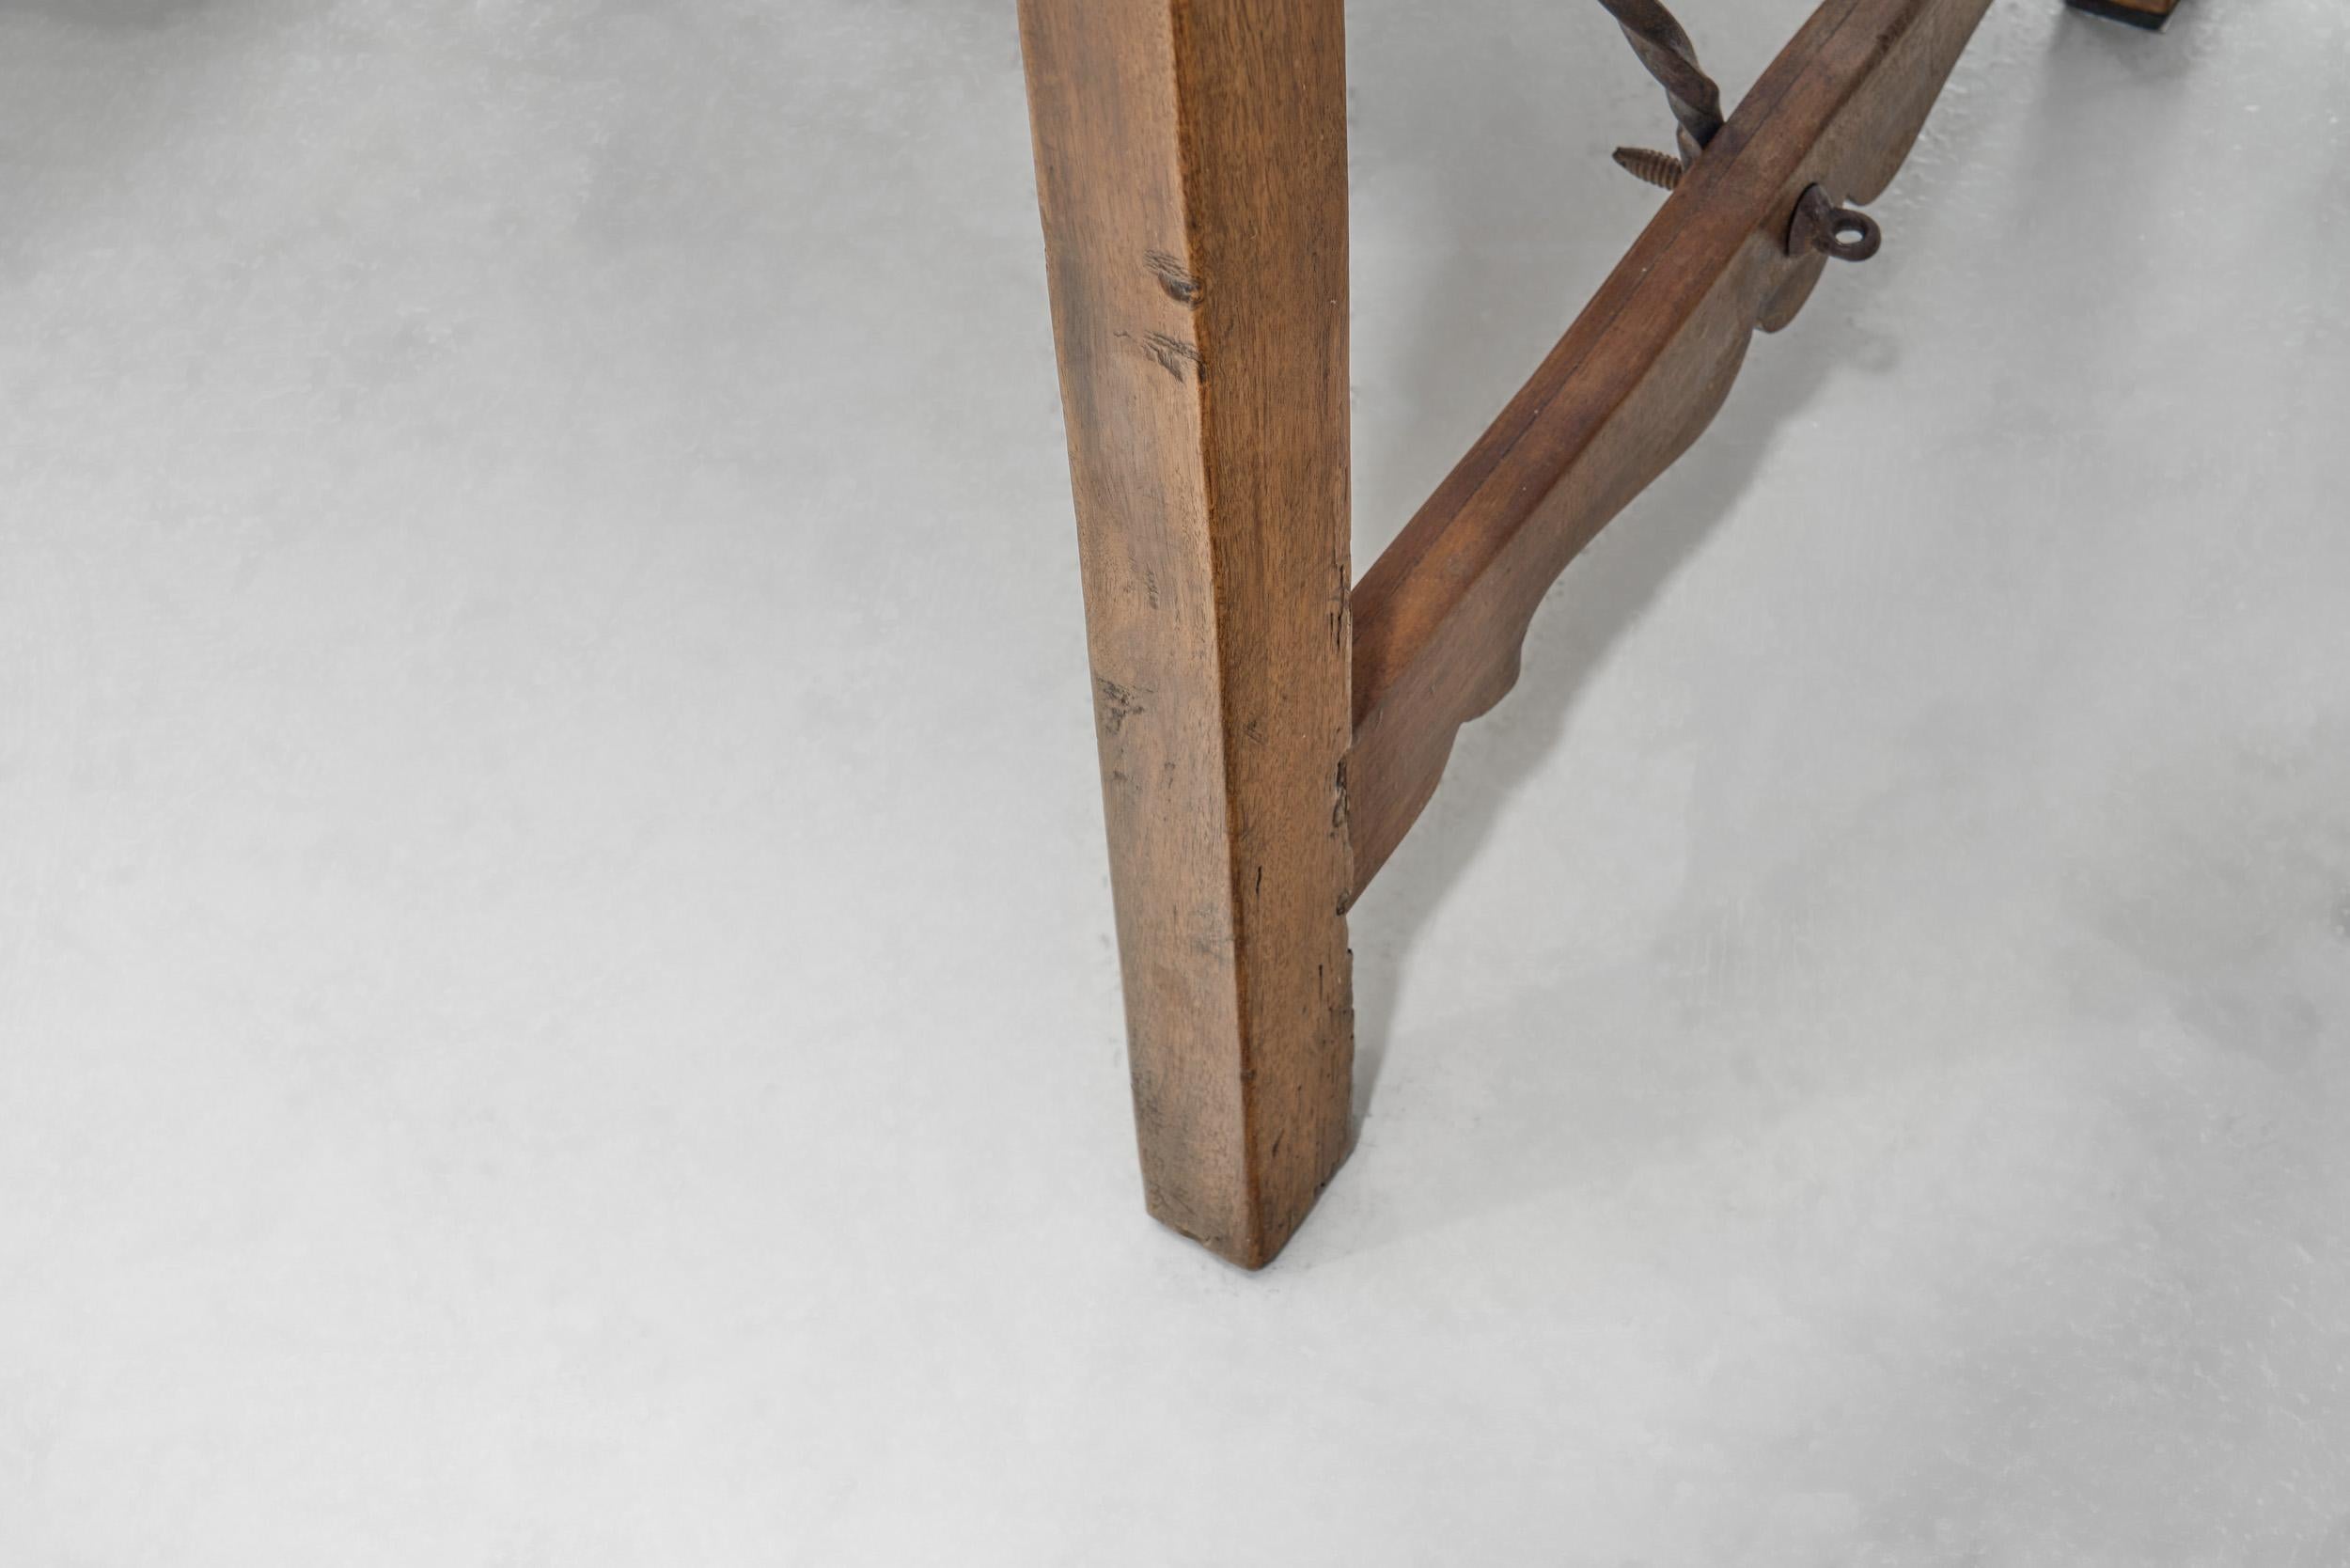 Spanish Walnut and Wrought Iron Table, Spain late 18th century For Sale 11